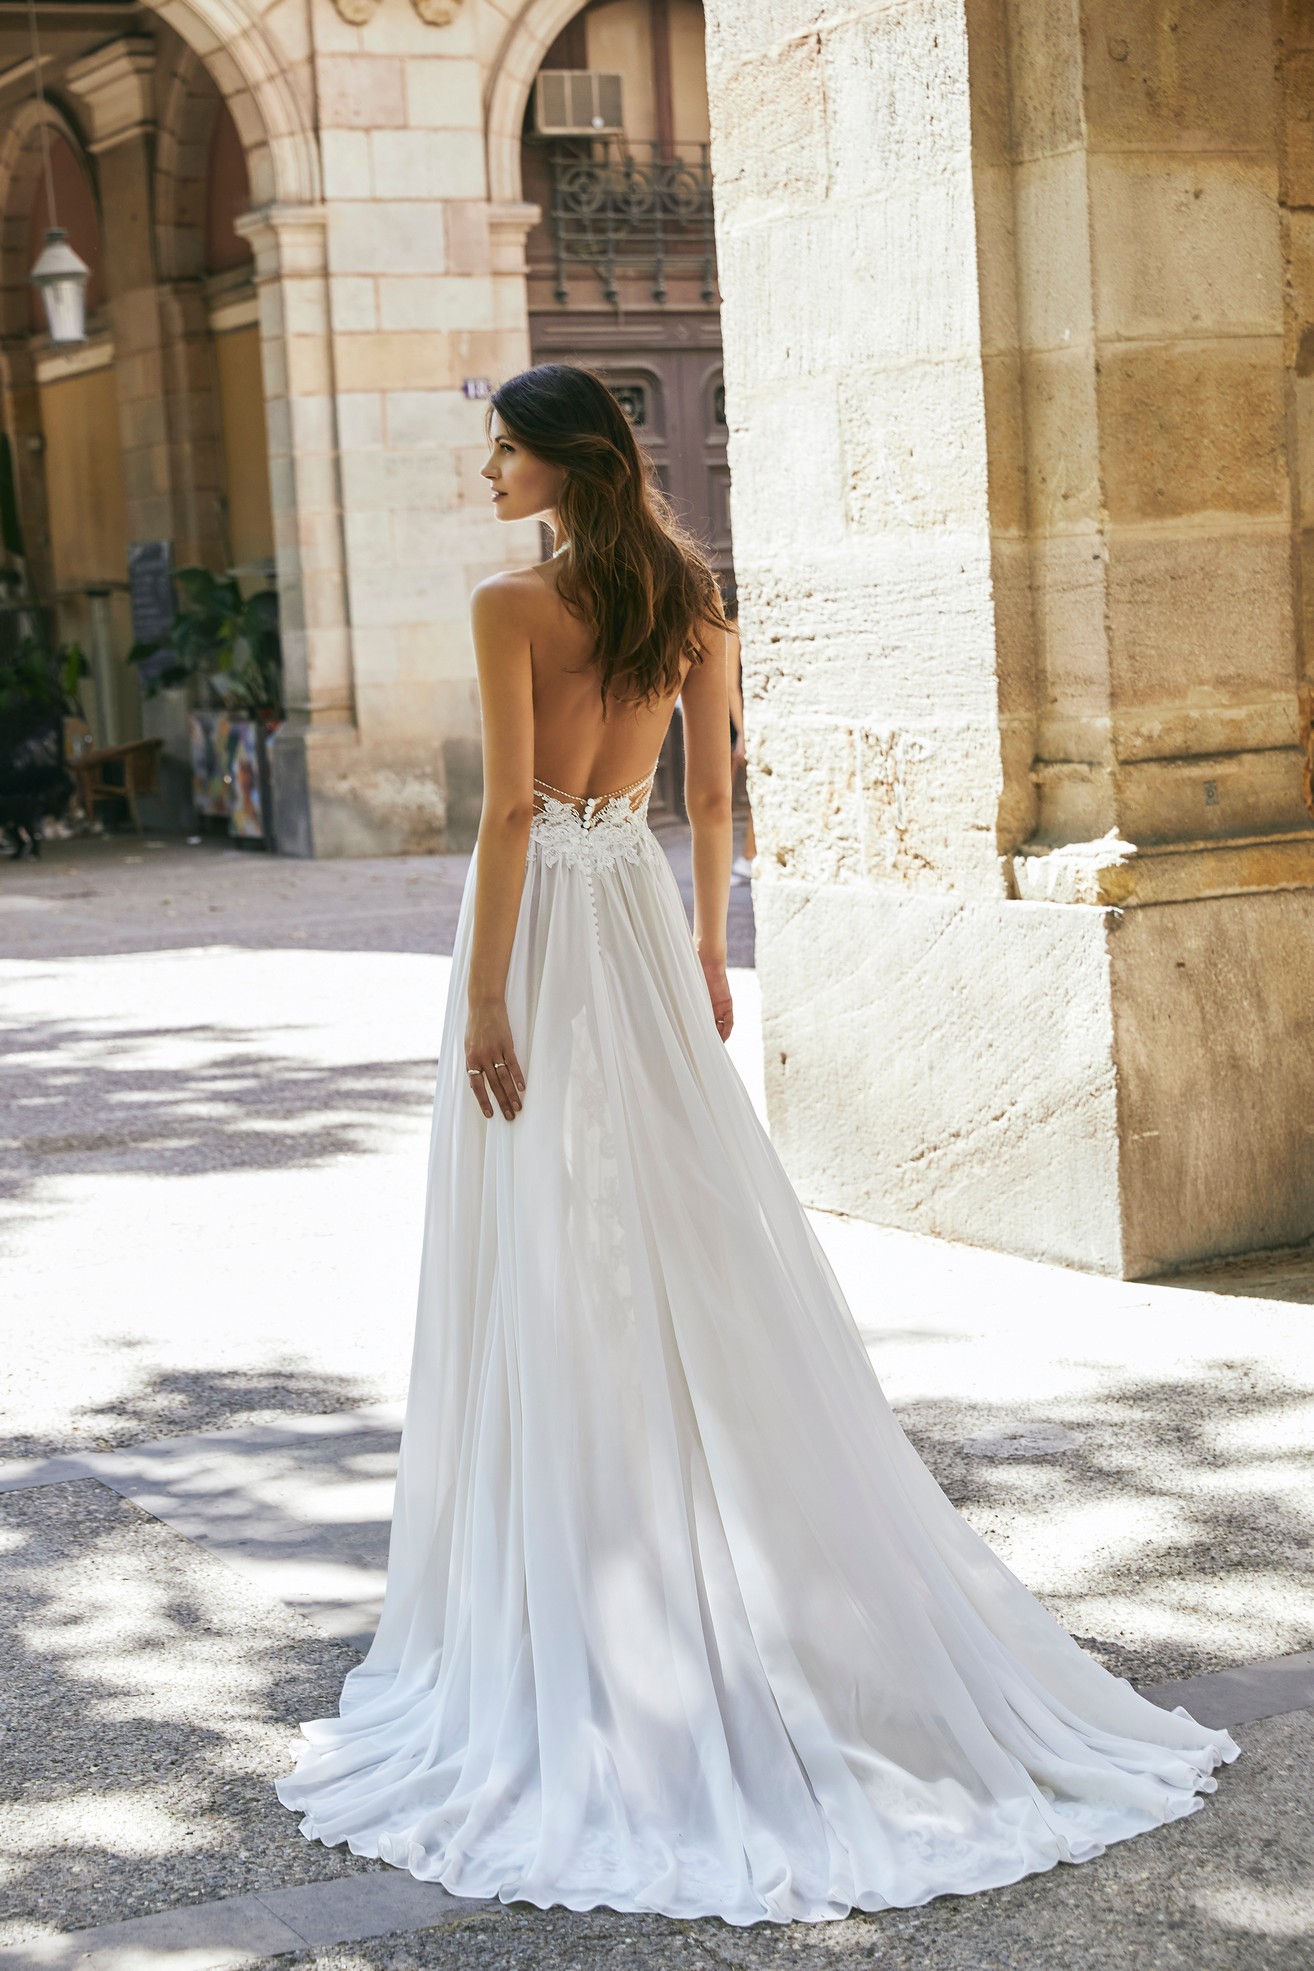 Back profile of model in Ronald Joyce destination wedding dress style 18611, a boho lace illusion halter neck dress with a plain chiffon skirt and open back